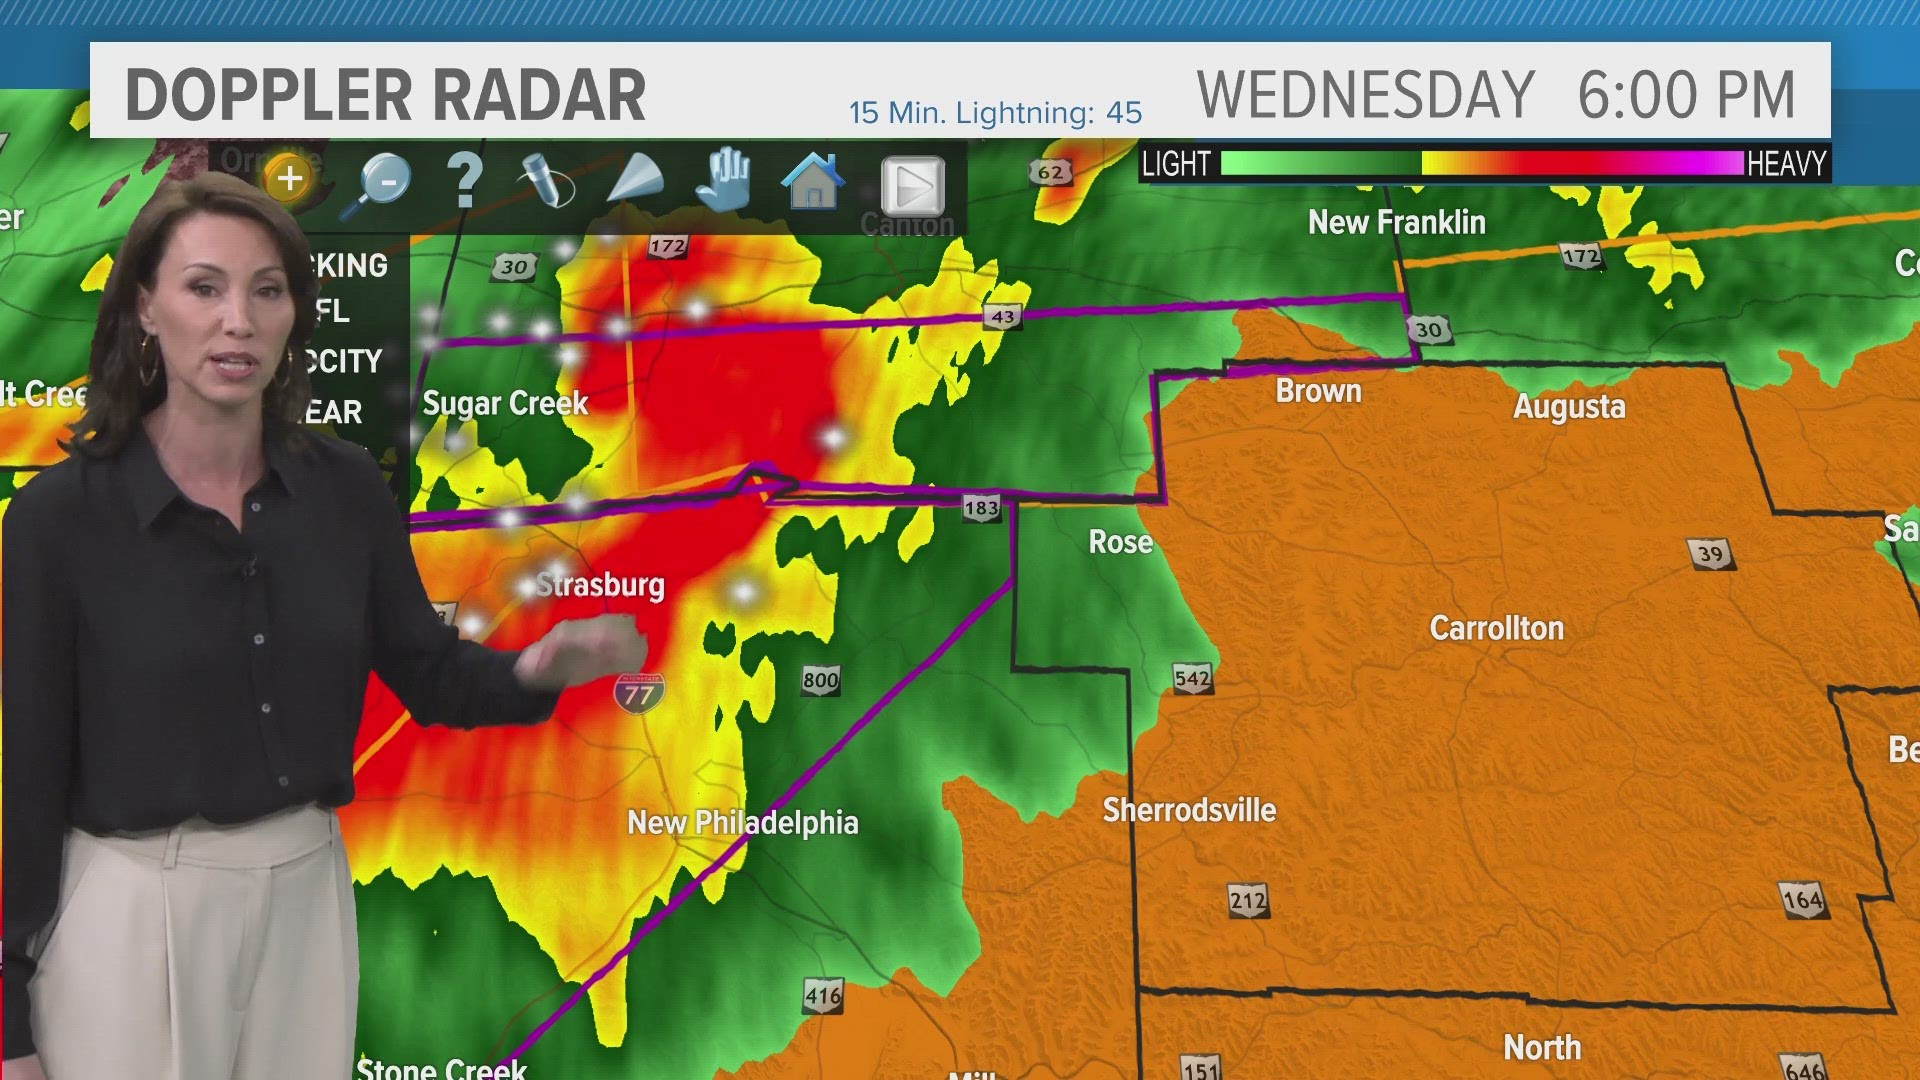 Portions of Ashland, Stark, Summit, Wayne, Holmes and Tuscarawas counties are being impacted by this storm.